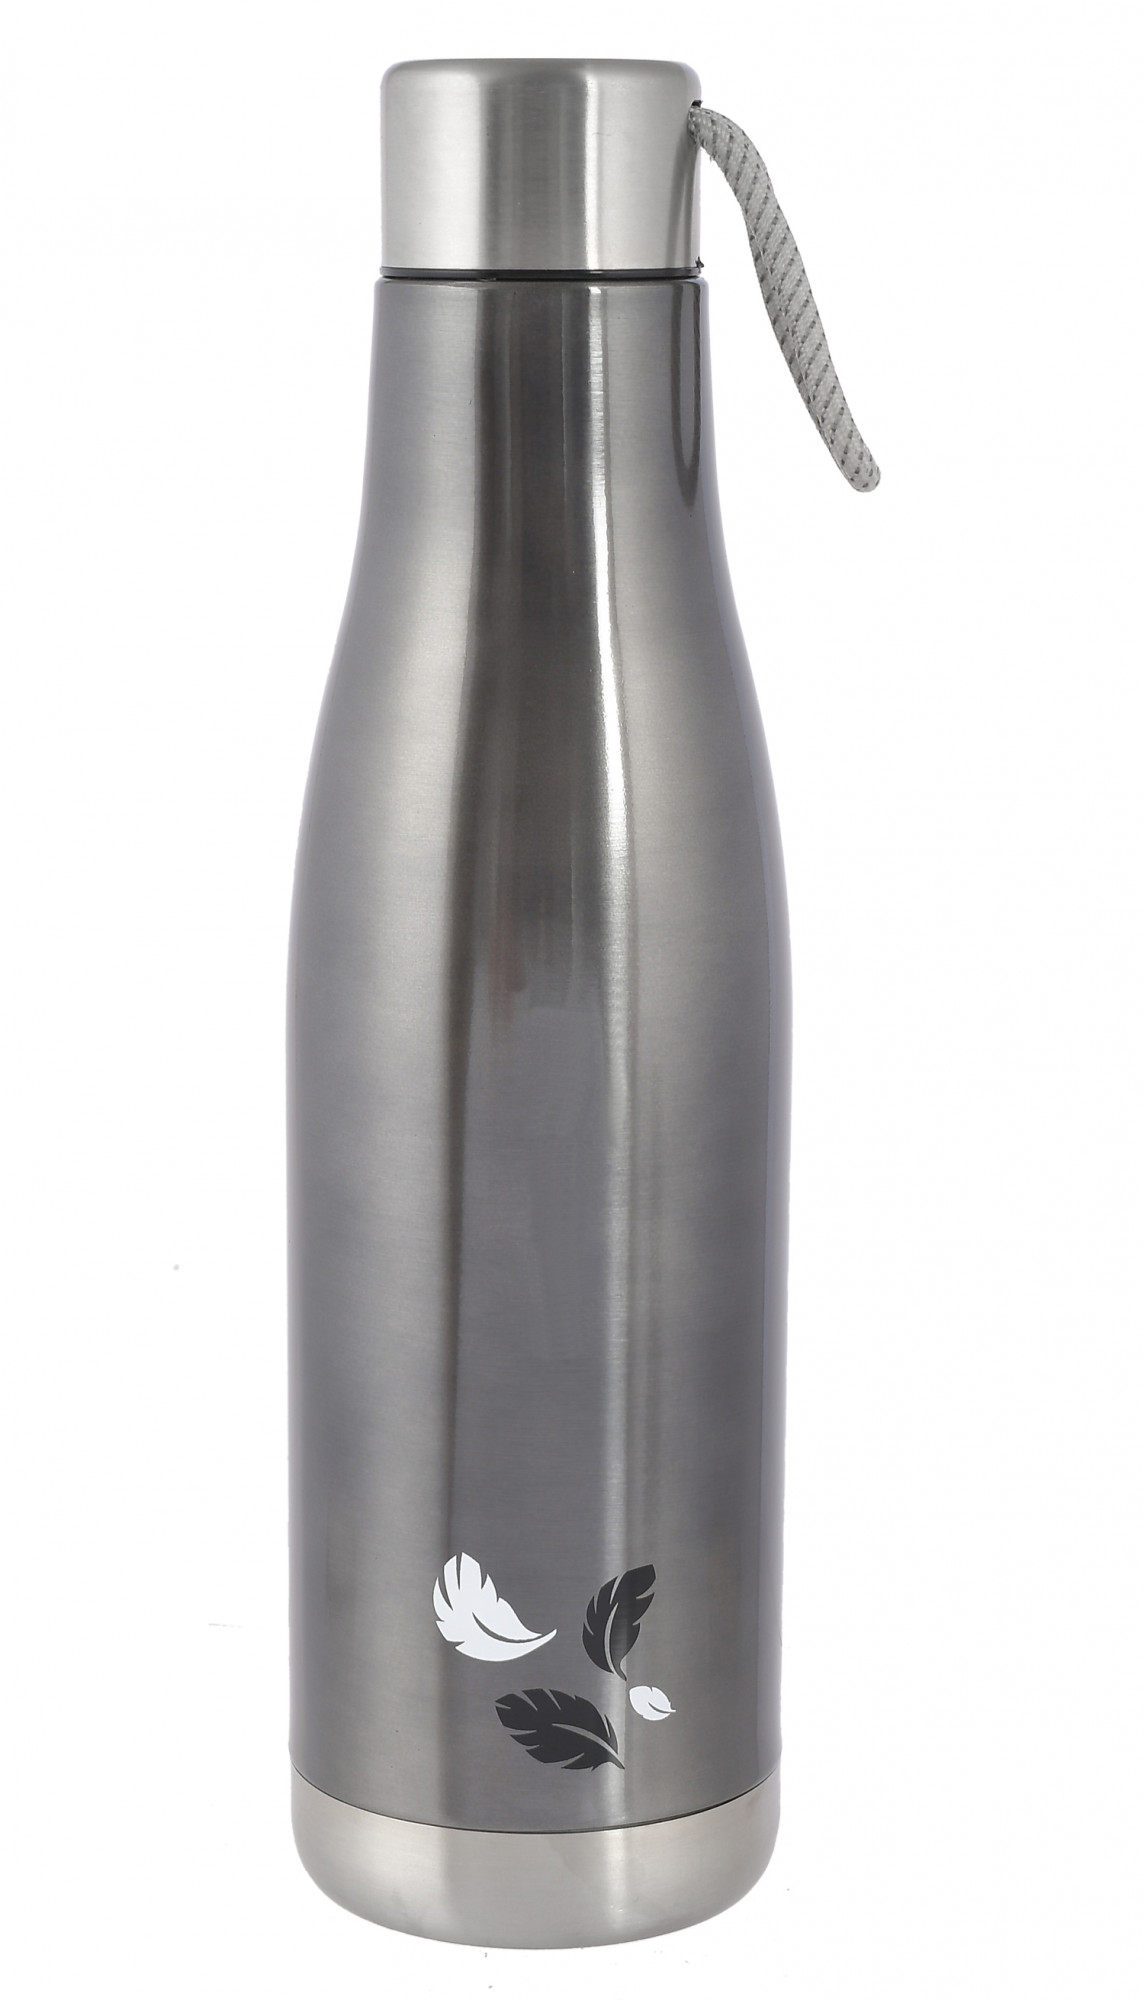 Kuber Industries Stainless Steel Hot And Cold Vacuum Flask With Carrying Strip, 1000ml (Grey)-HS42KUBMART25173